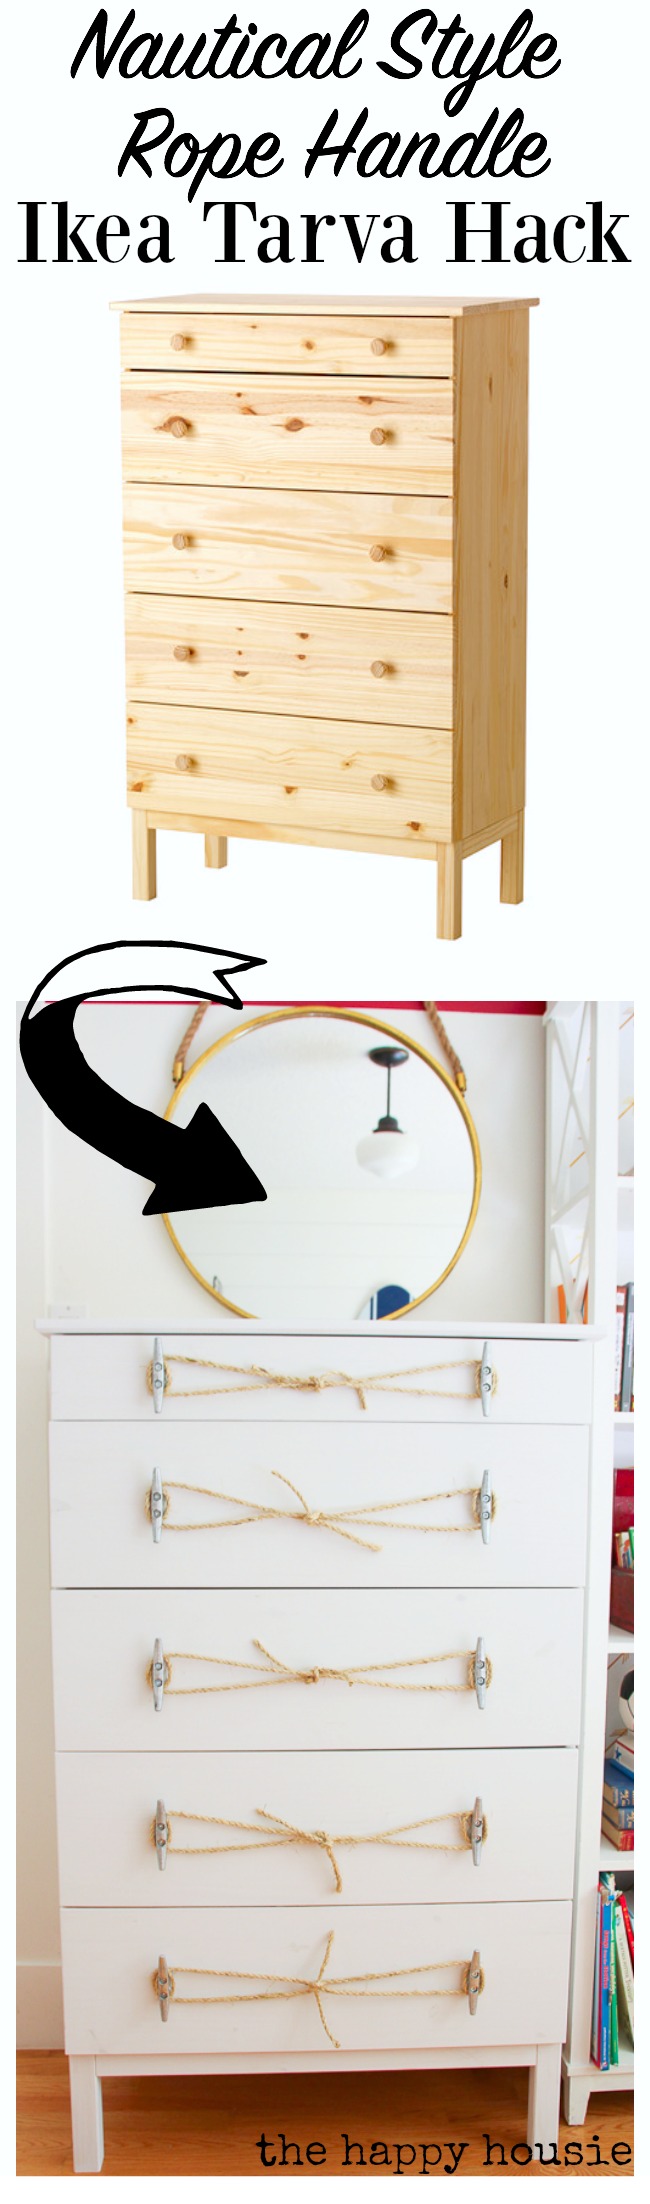 Nautical Style Ikea Tarva Hack Dresser with Dock Cleat and Rope Handles at thehappyhousie